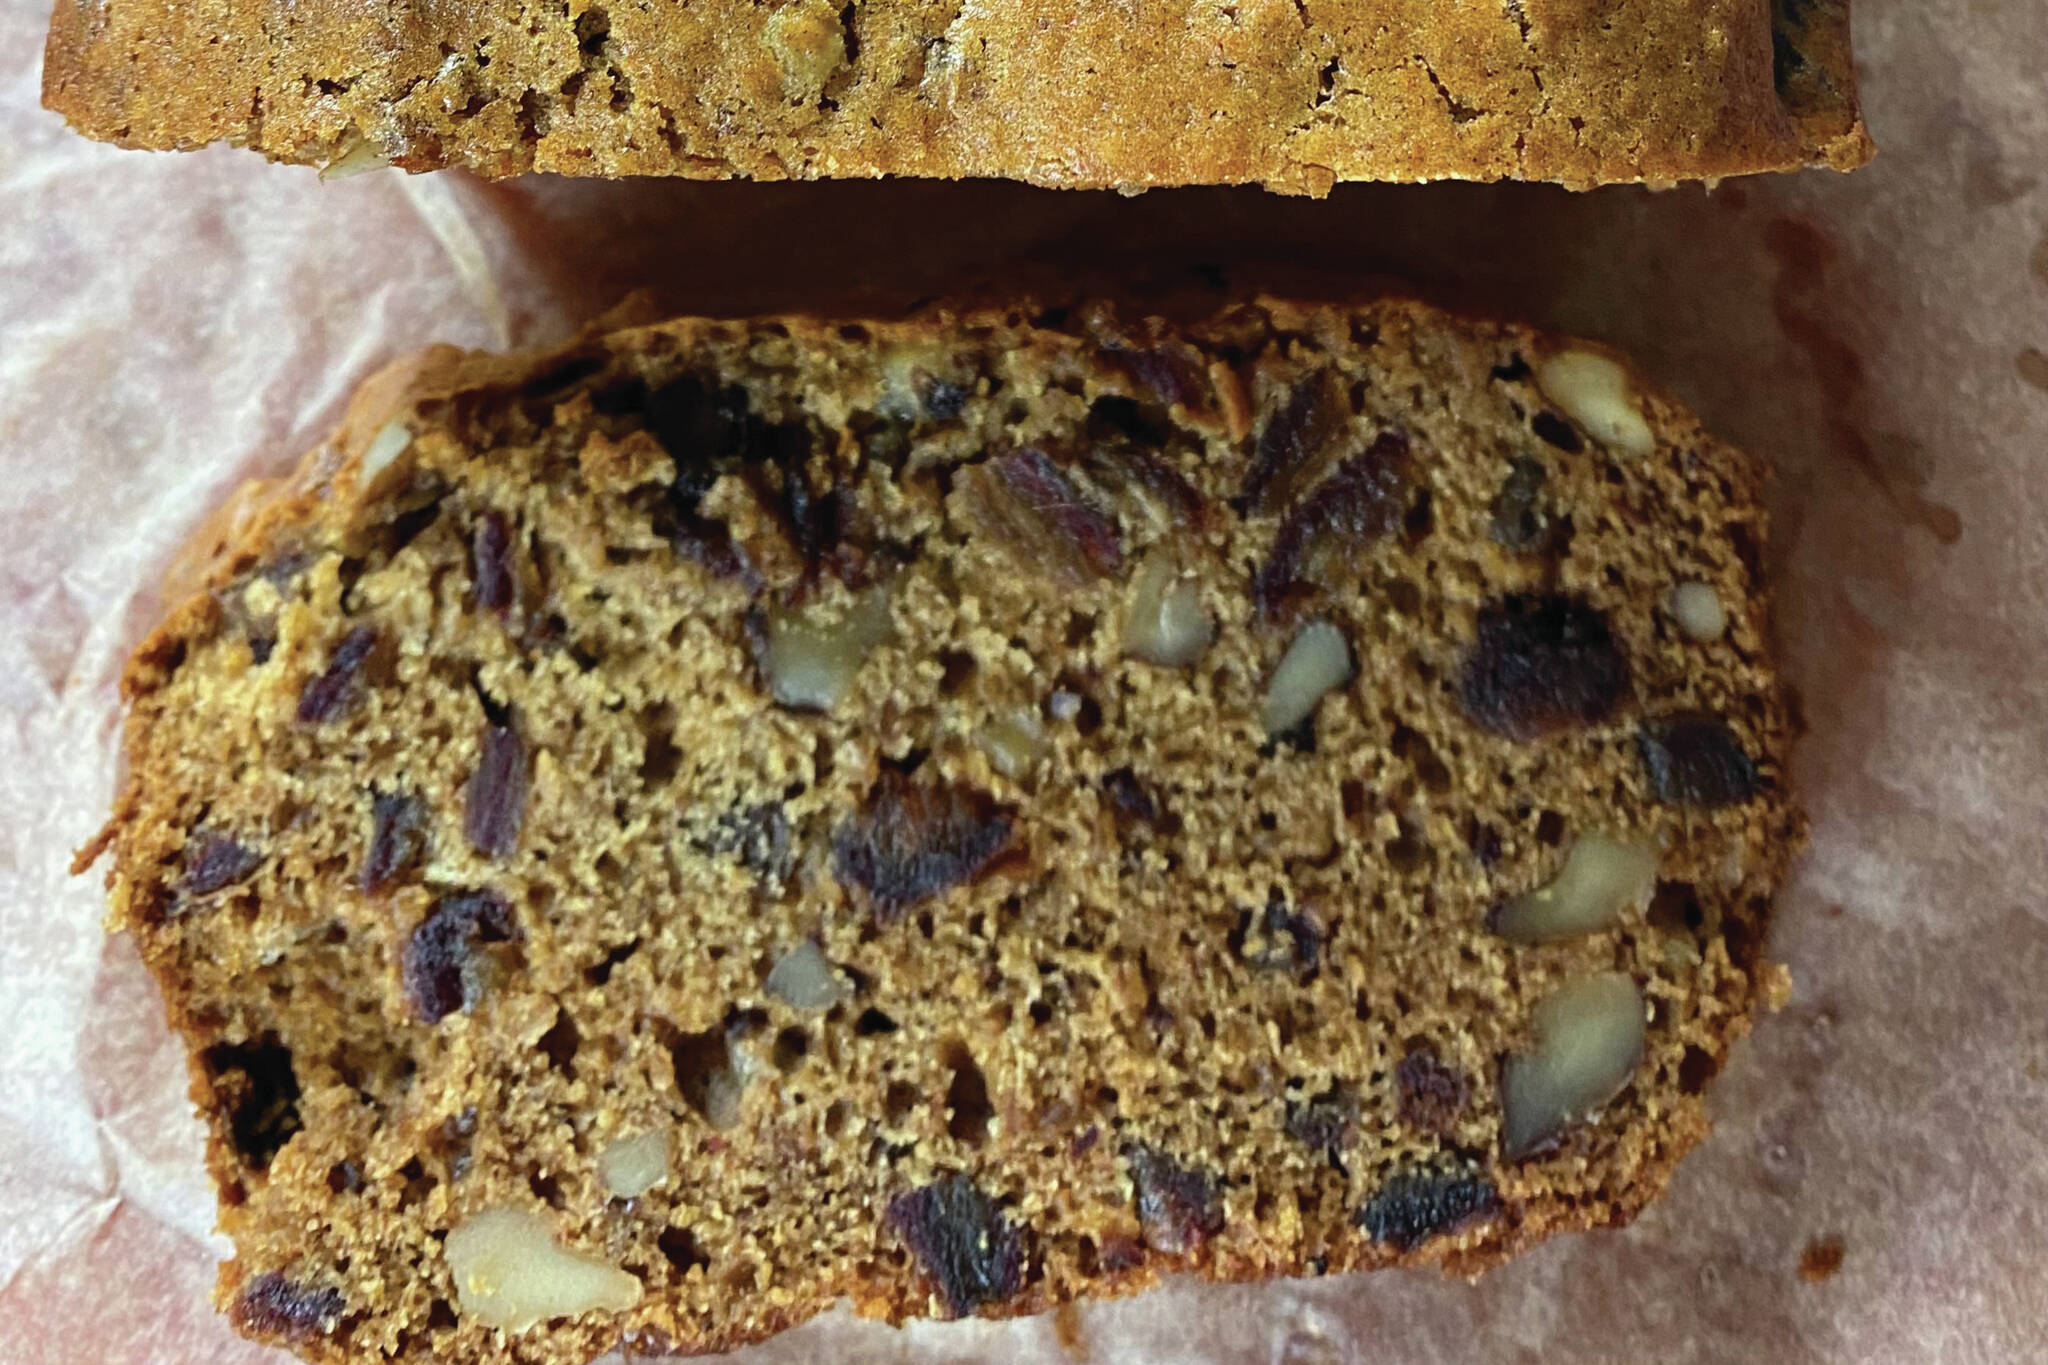 This date and walnut bread is sweet, dense and fragrant with spices. (Photo by Tressa Dale/Peninsula Clarion)